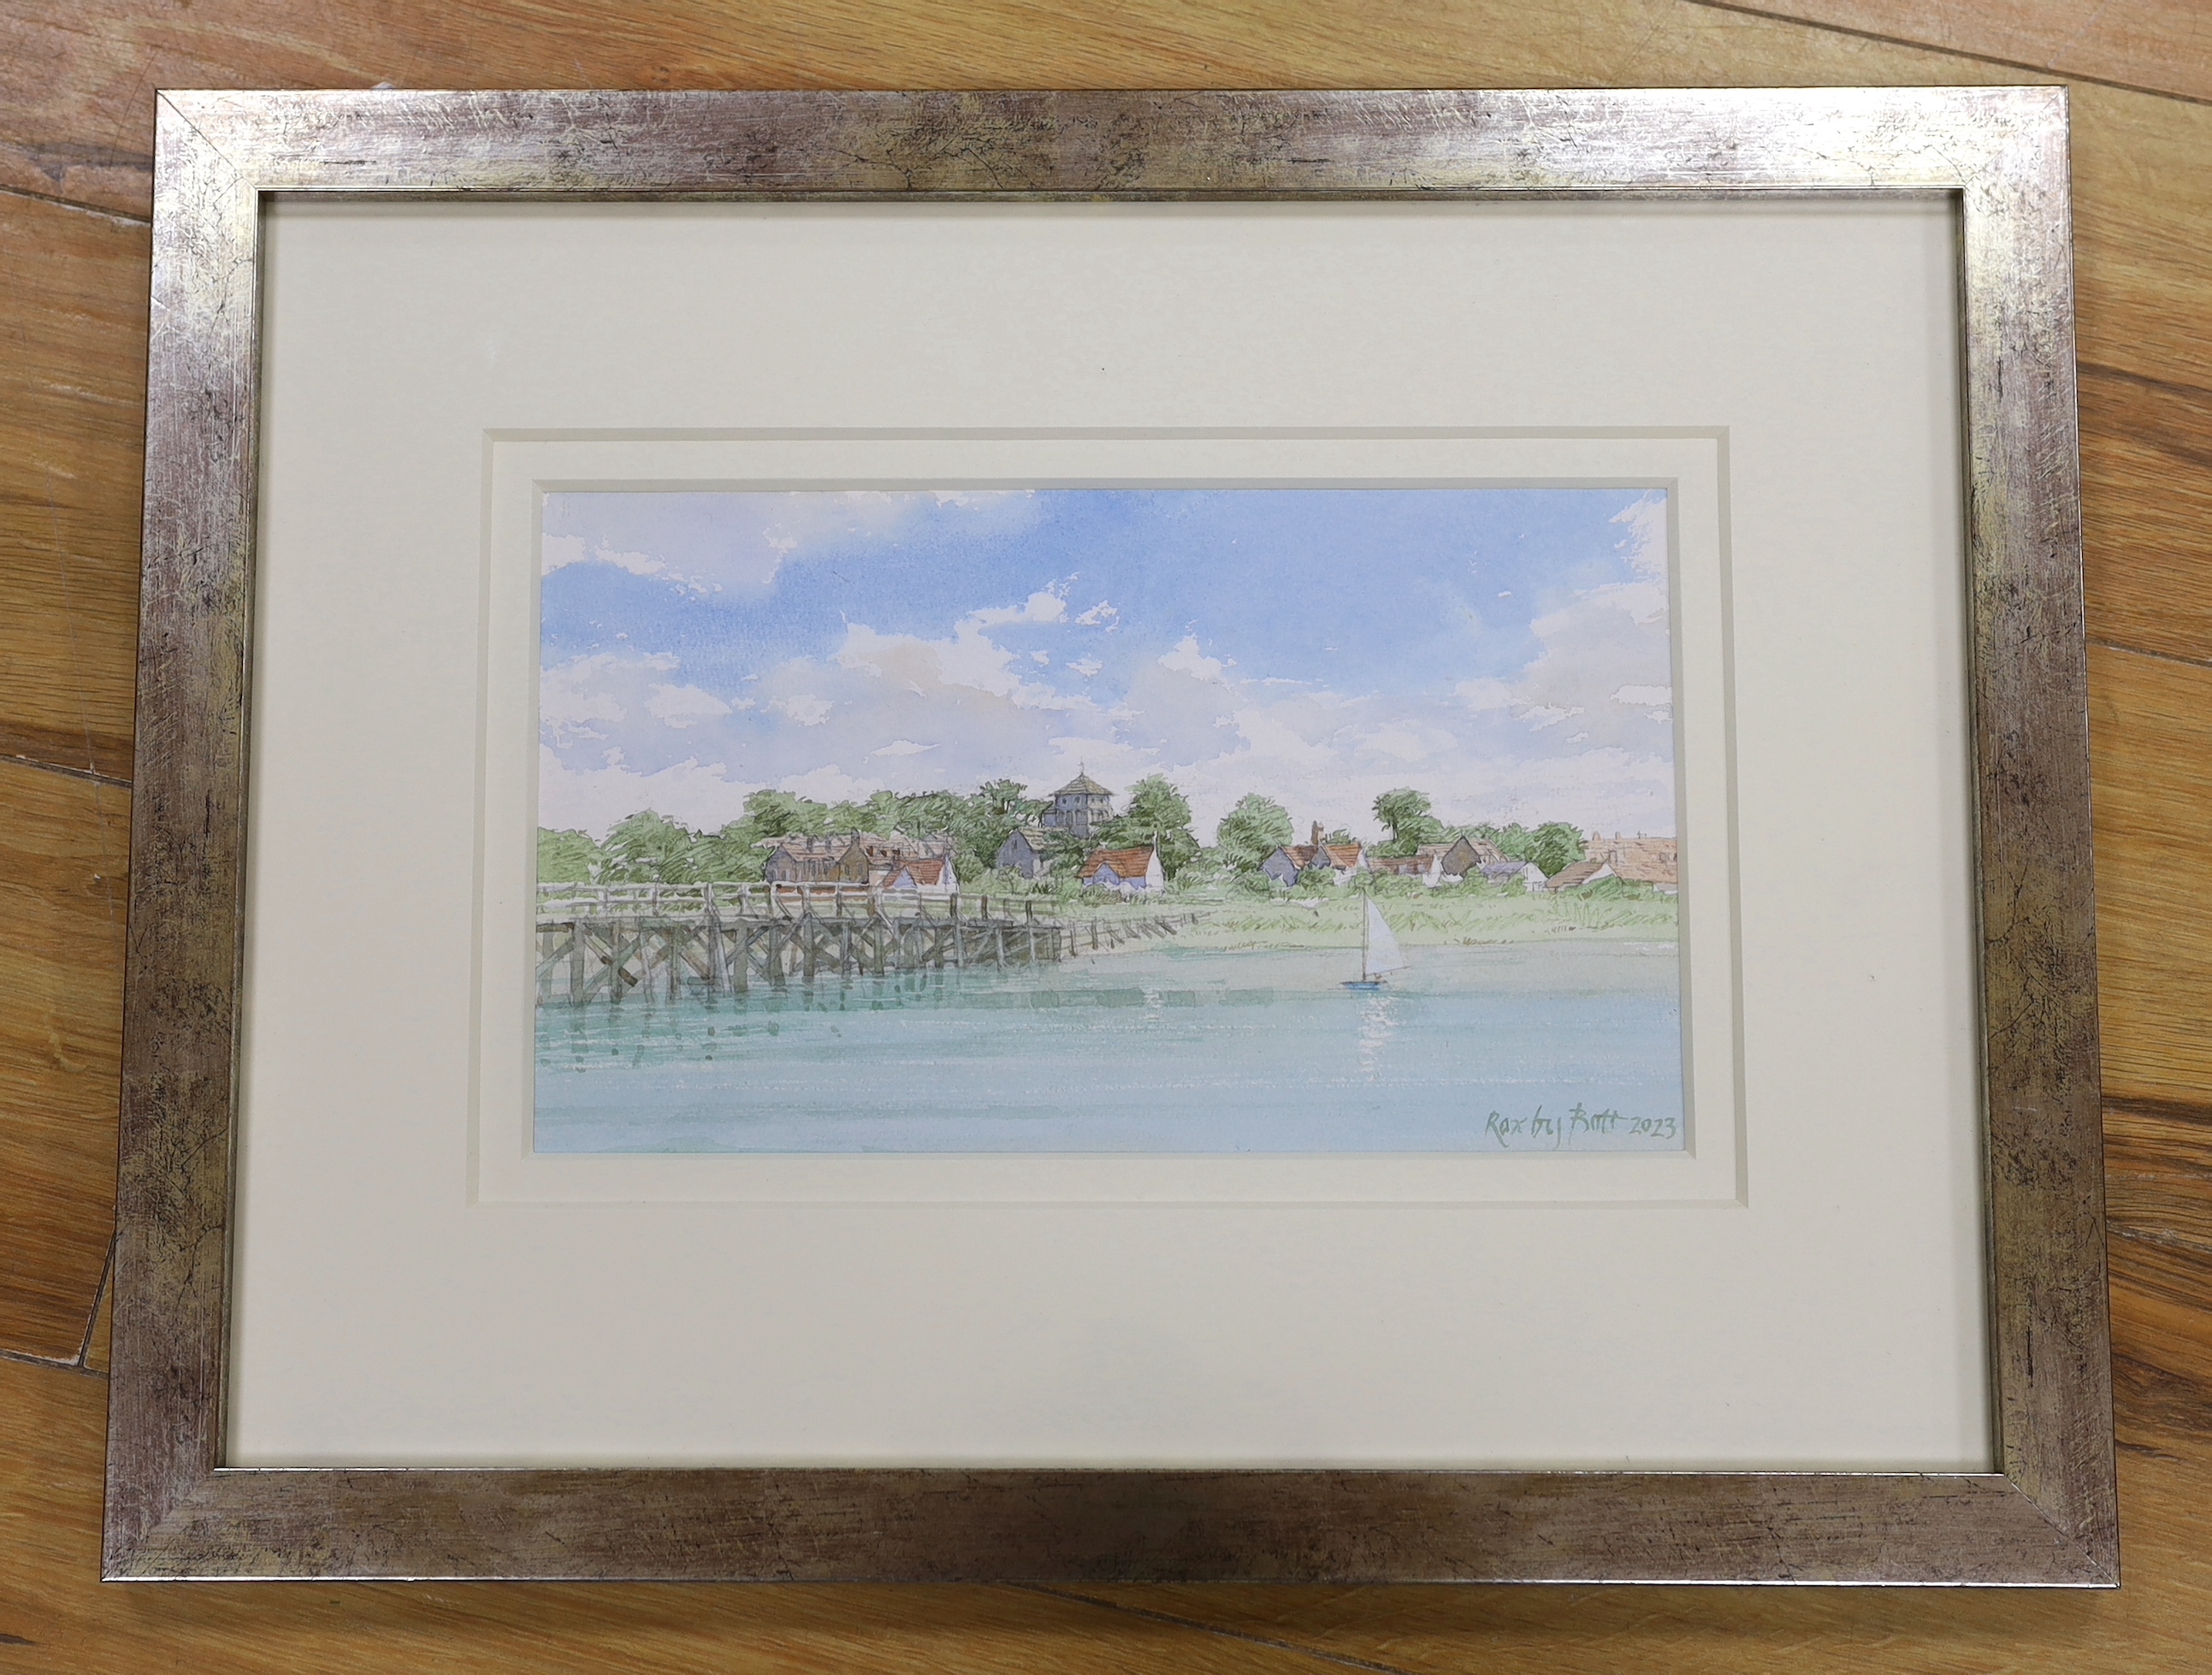 Dennis Roxby Bott RWS (b.1948) watercolour, Wooden bridge at Shoreham, signed and dated 2023, inscribed RWS - Home Exhibition label verso, 19 x 31cm